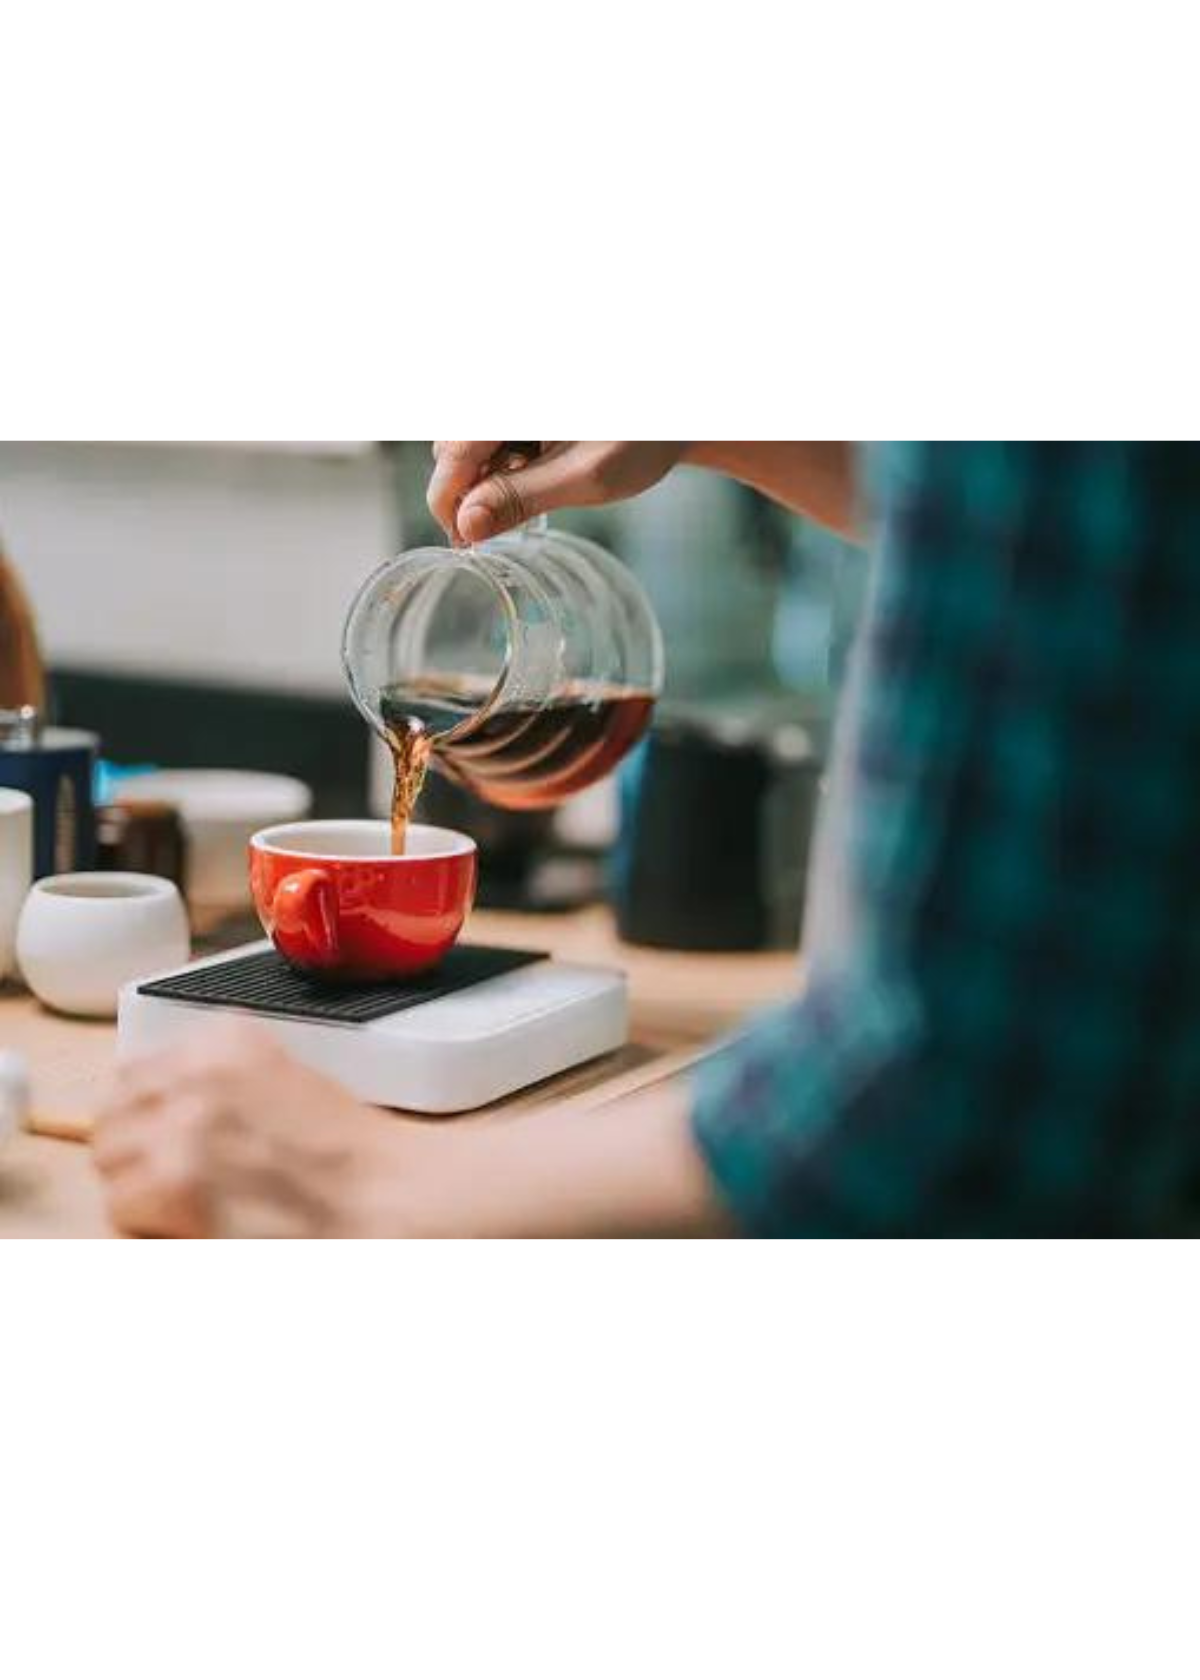 Best Coffee Scale Showdown: 5 Models You Can't Miss!